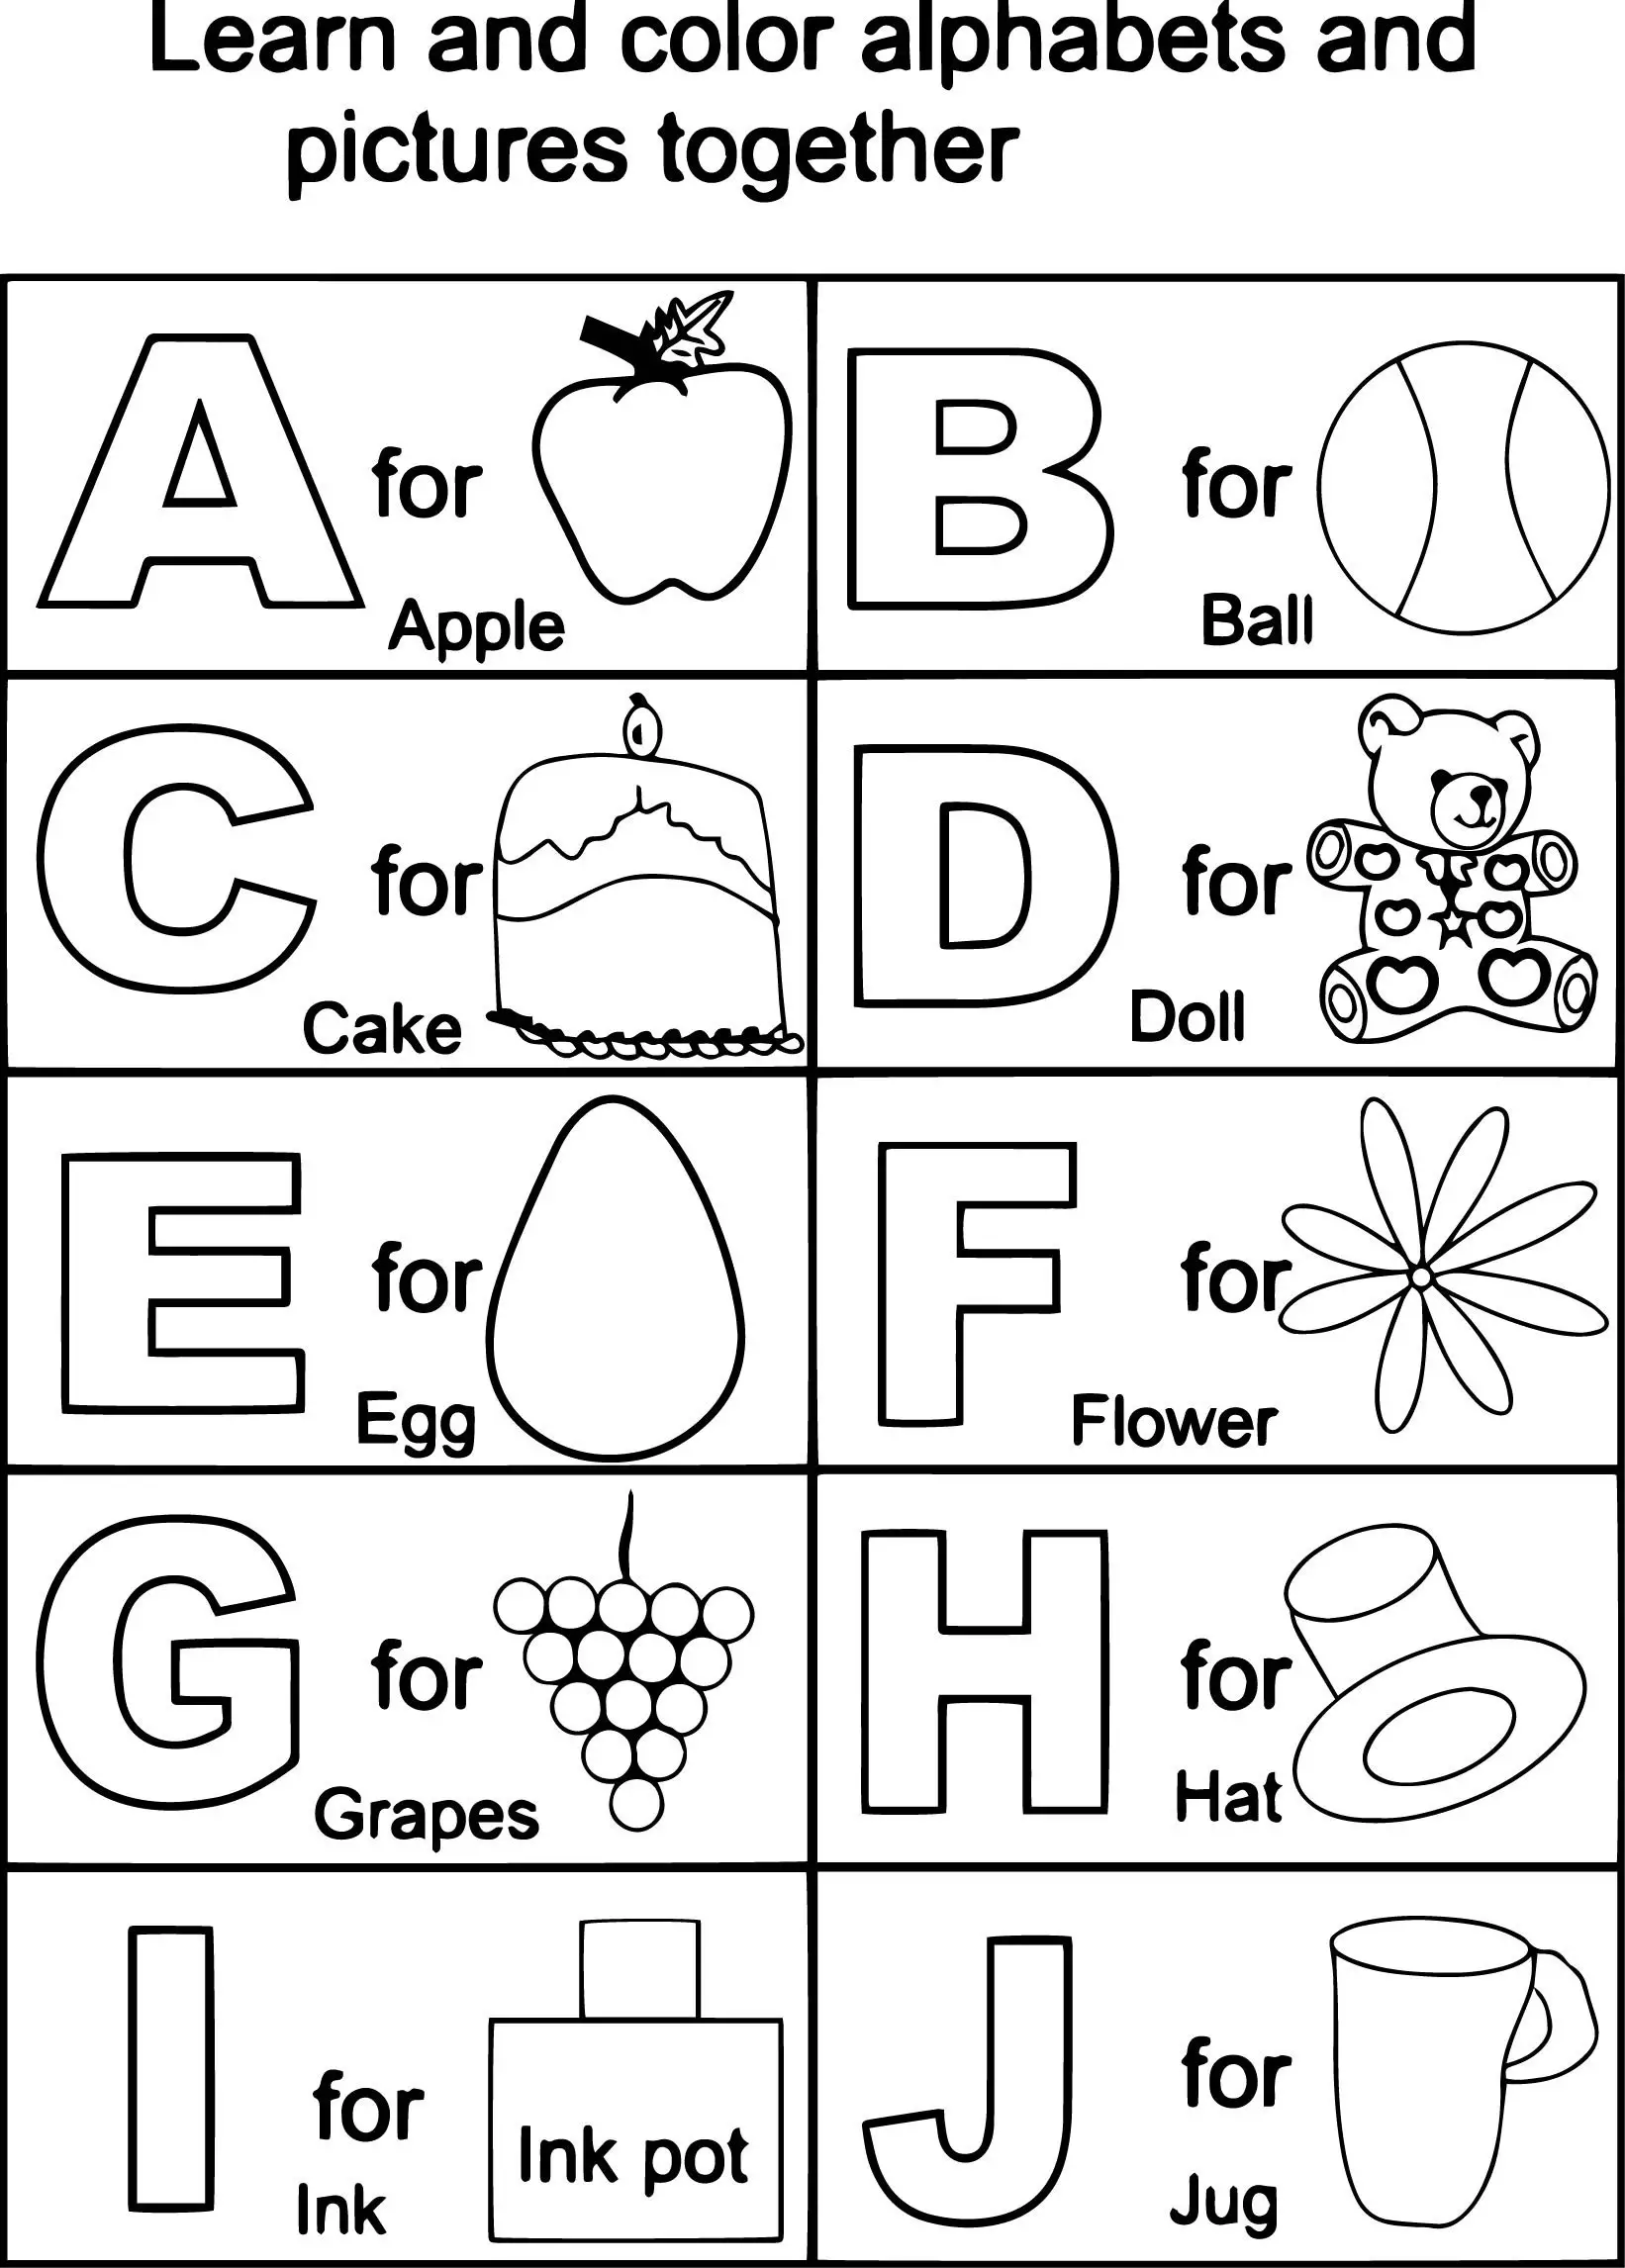 60-alphabet-flash-cards-to-print-for-making-learning-fun-kitty-baby-love